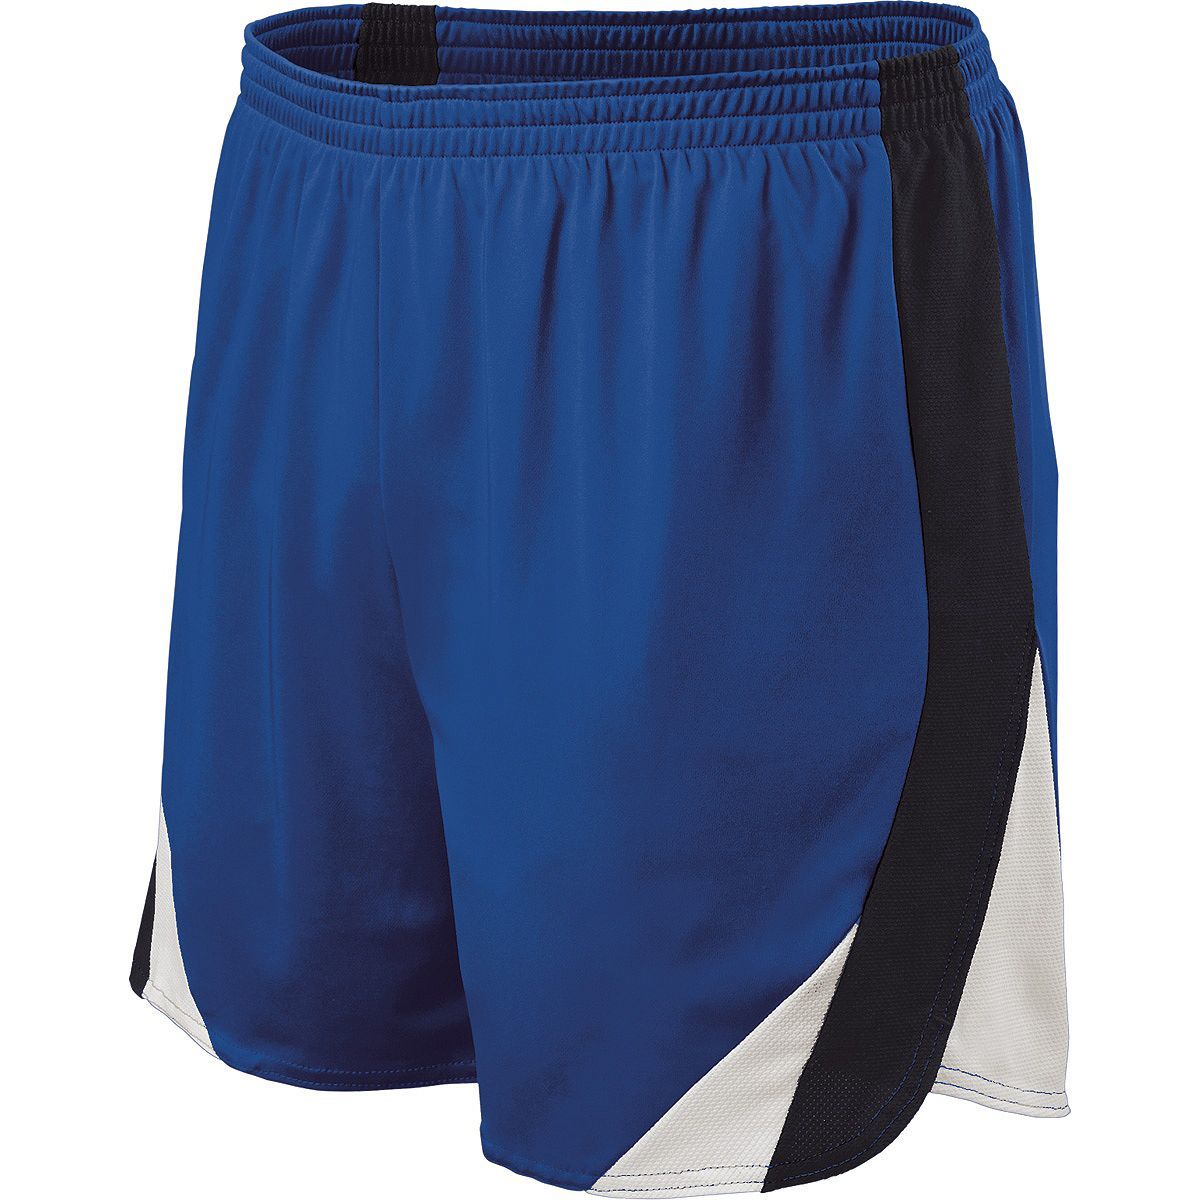 Holloway Approach Shorts in Royal/Black/White  -Part of the Adult, Adult-Shorts, Track-Field, Holloway product lines at KanaleyCreations.com